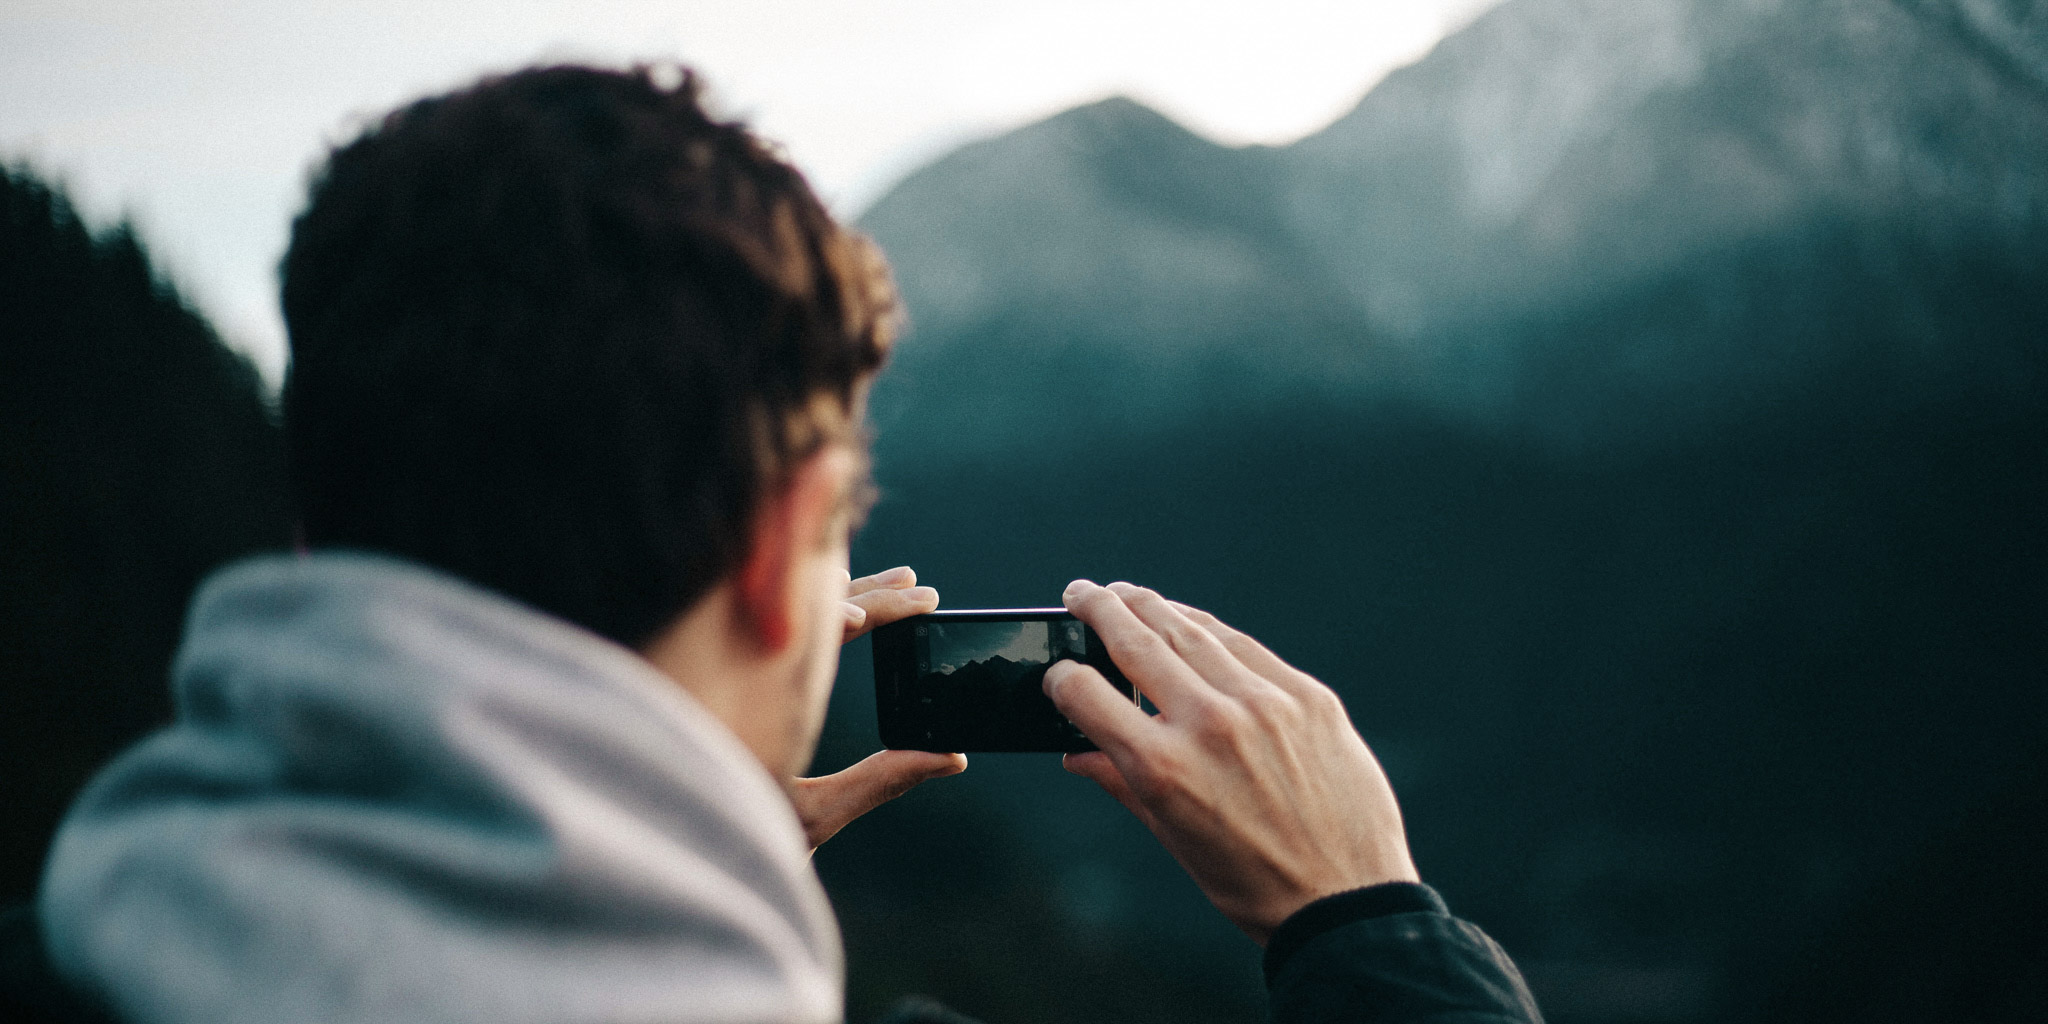 10 Tips For Taking Travel Photos on Your Phone